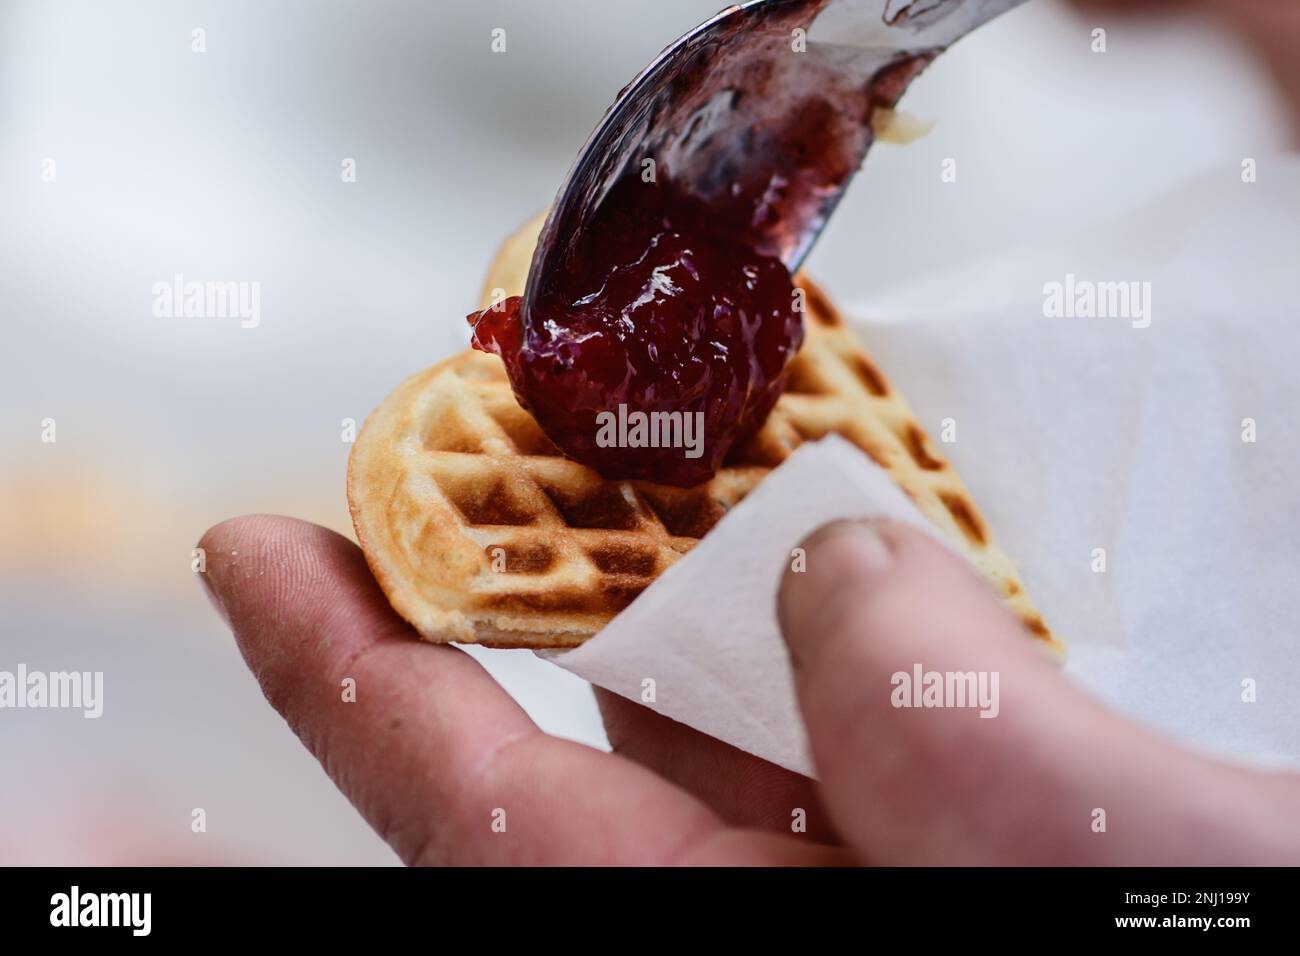 Preparing waffle or waffles with jam, dish made from leavened butter or dough that is cooked between two plates that are patterned to give a character Stock Photo